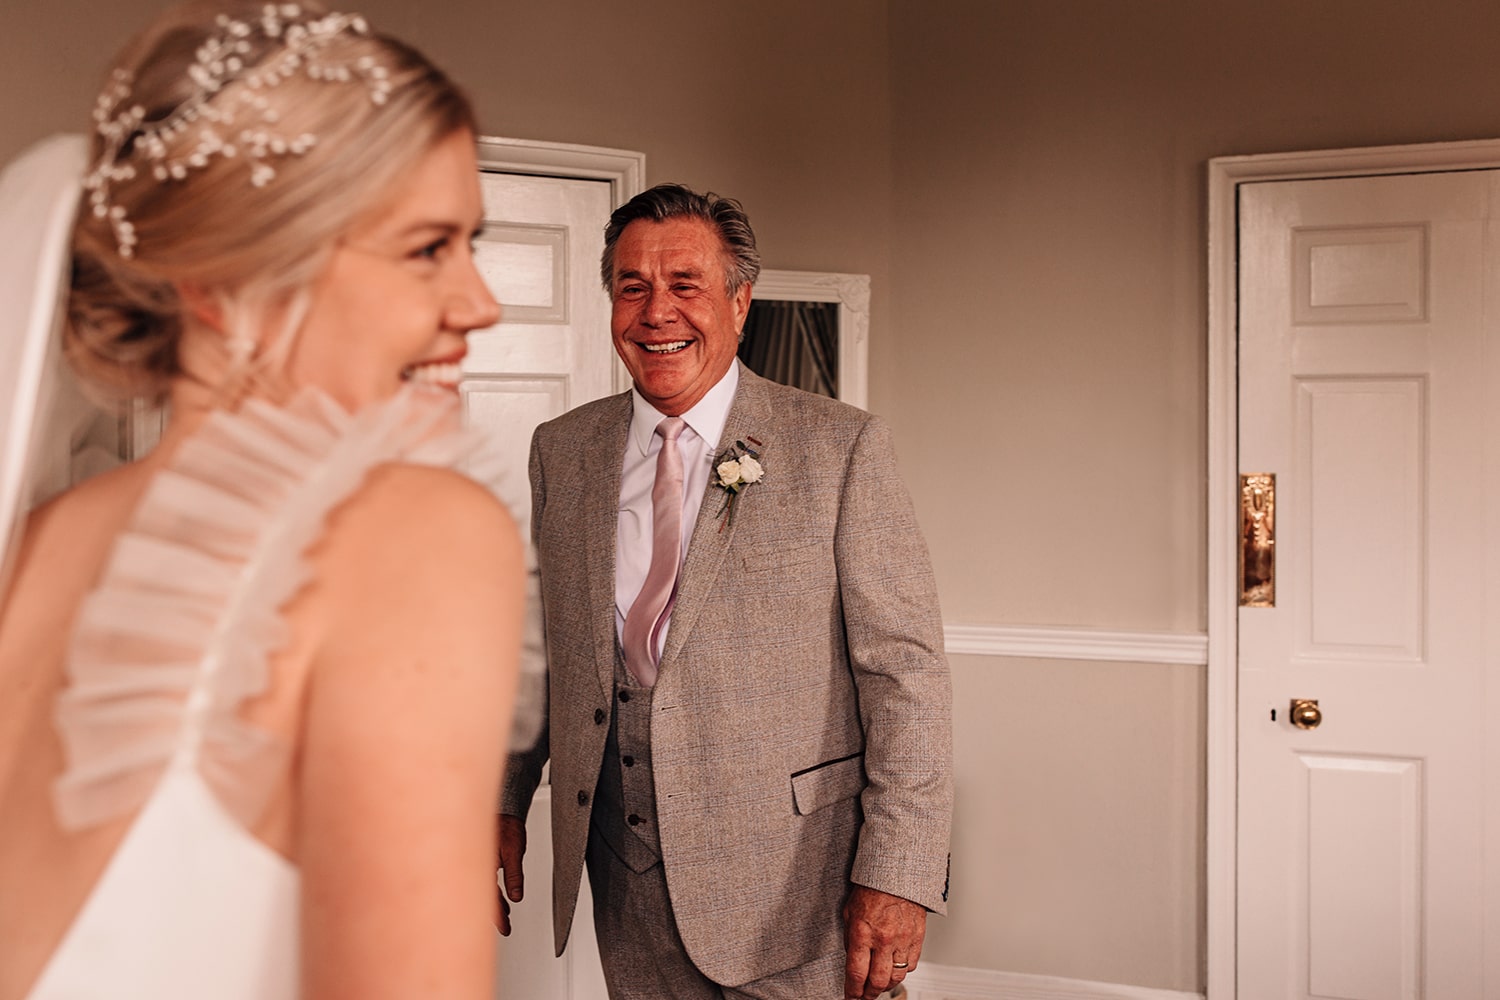 Father of the Bride seeing his daughter in her wedding gown for the first time